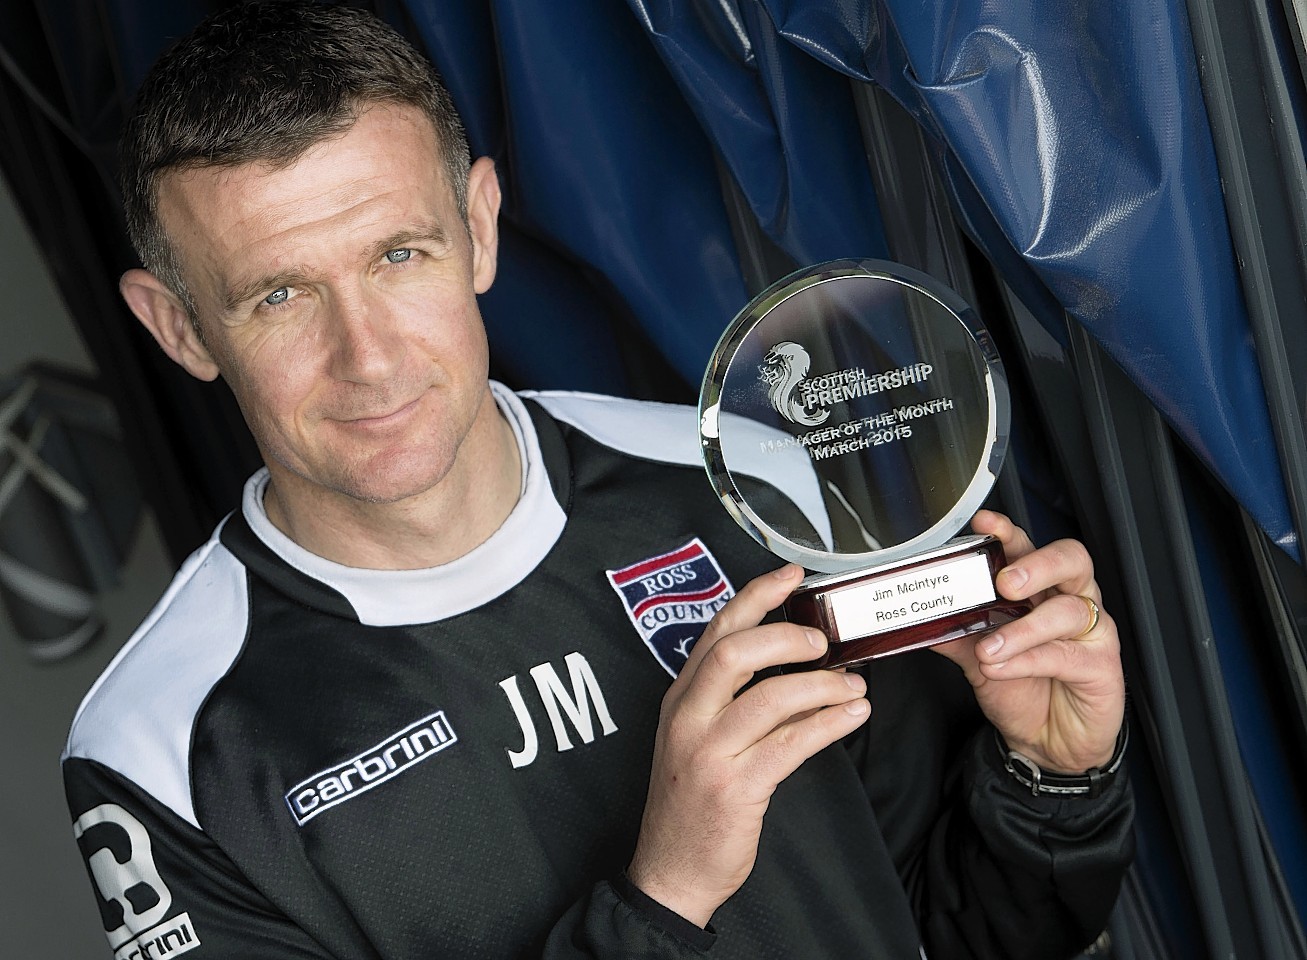 Jim McIntyre has scooped two manager of the month awards in a row